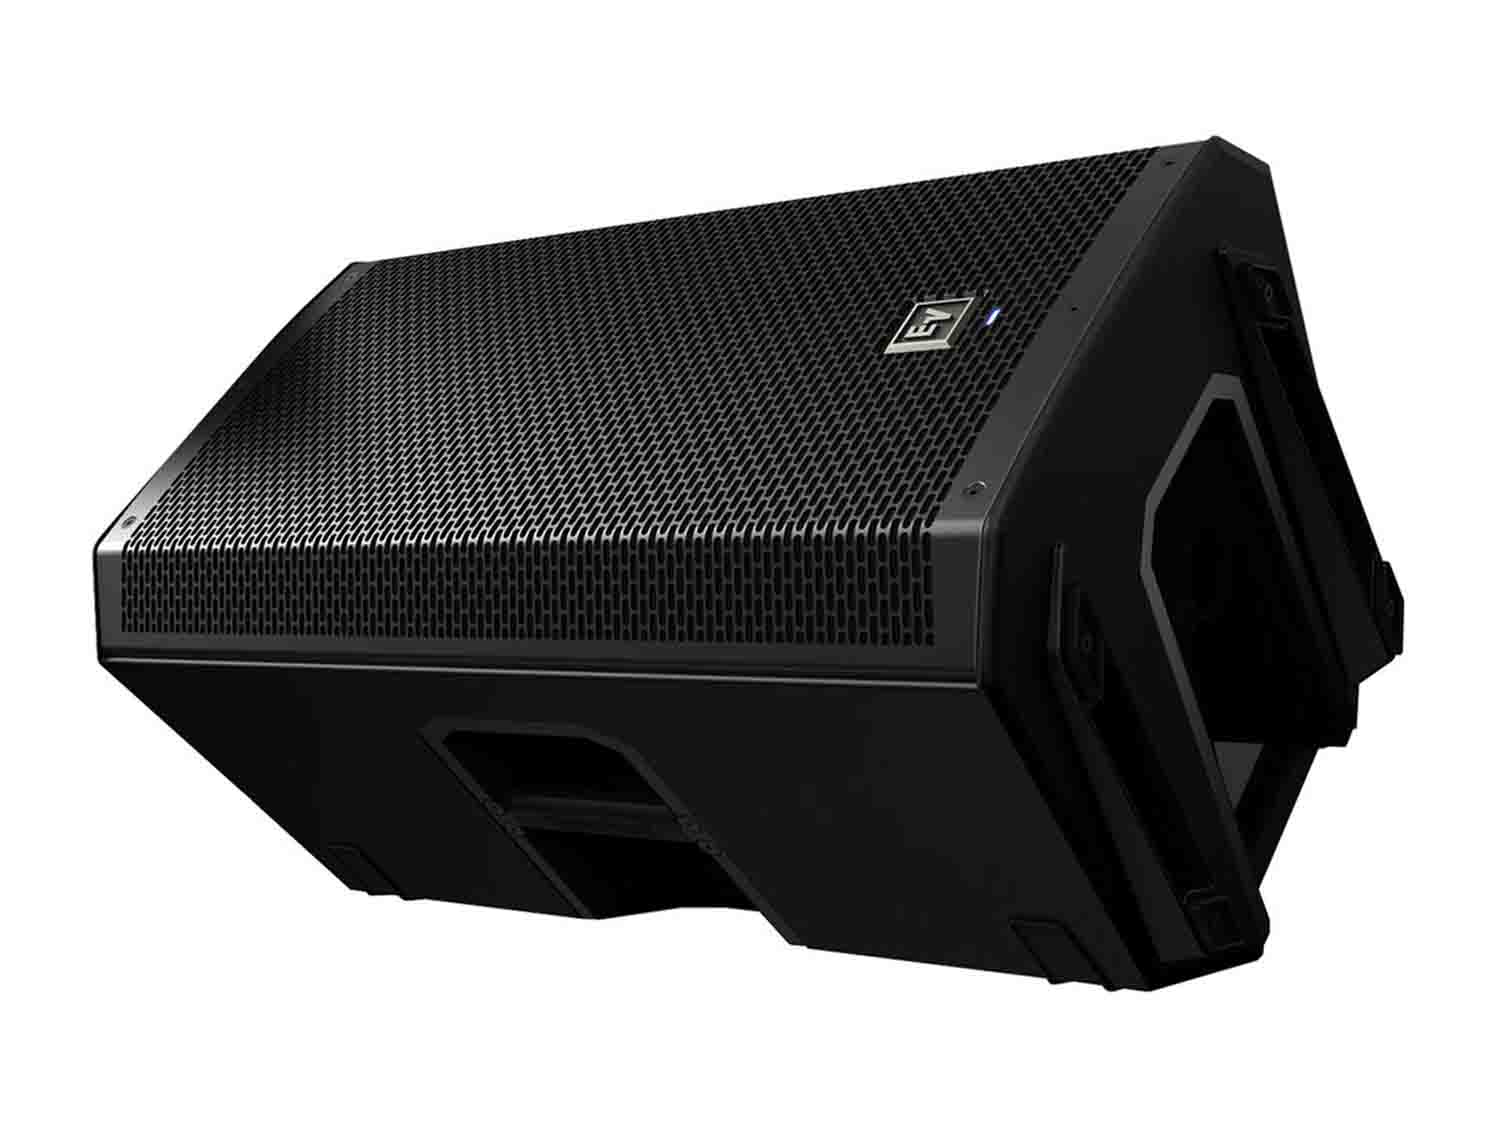 Electro-Voice ZLX-15BT-US, 15" 2-Way 1000W Powered Loudspeaker with Bluetooth (Black) - Hollywood DJ